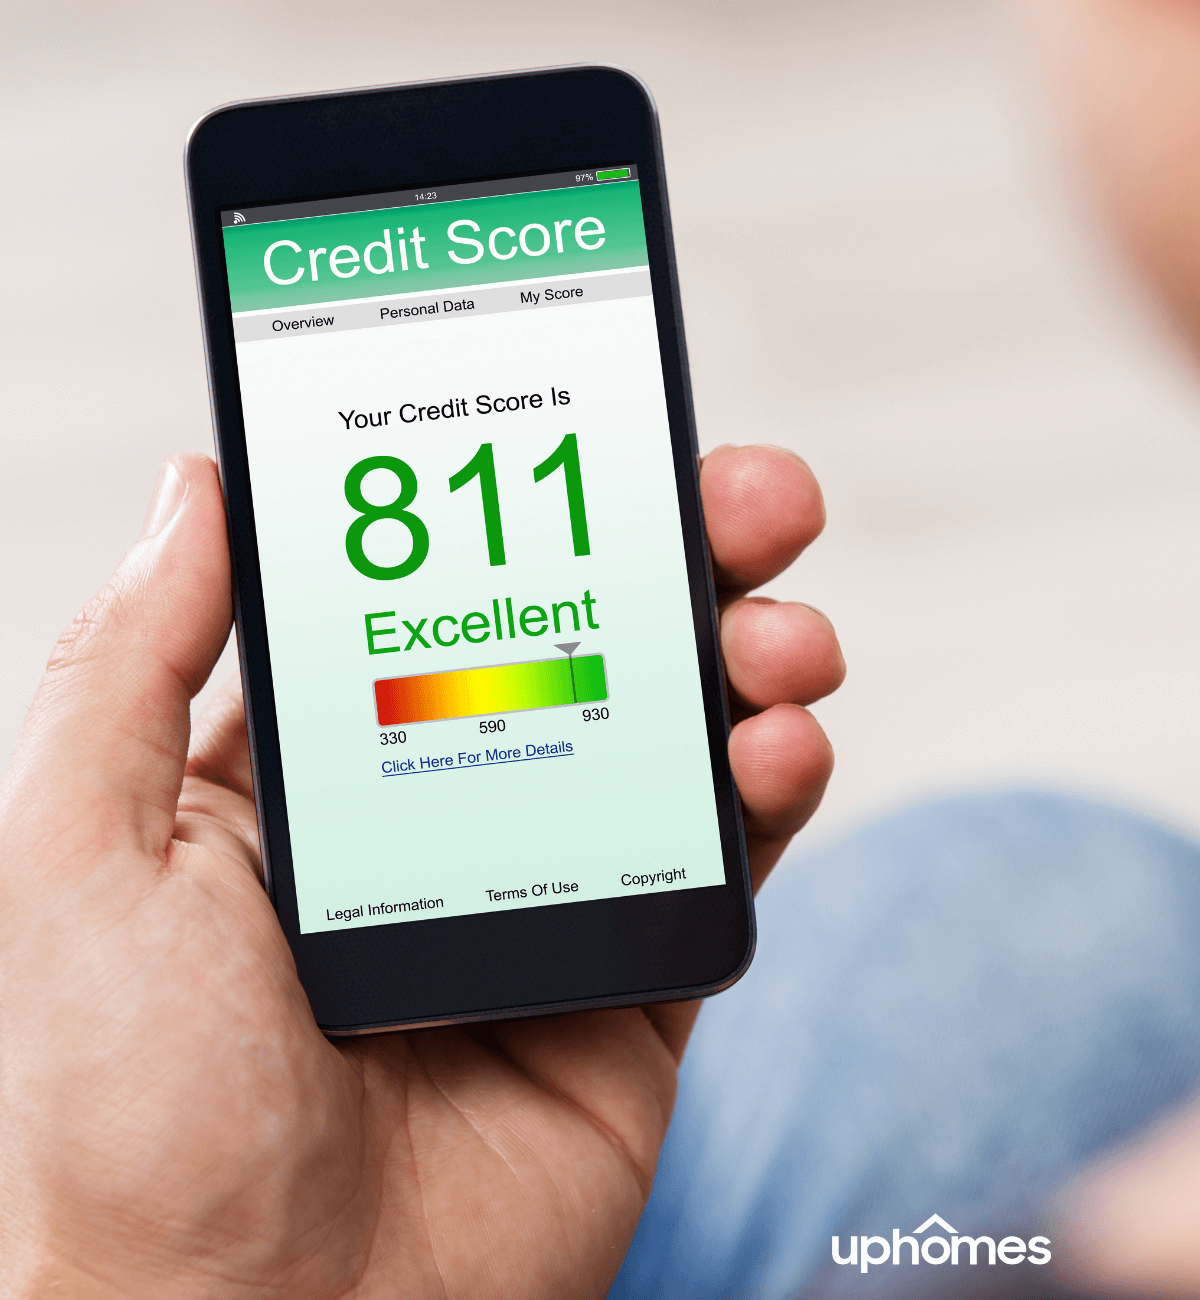 Use Credit Karma to obtain your Credit Score and Credit Report Information